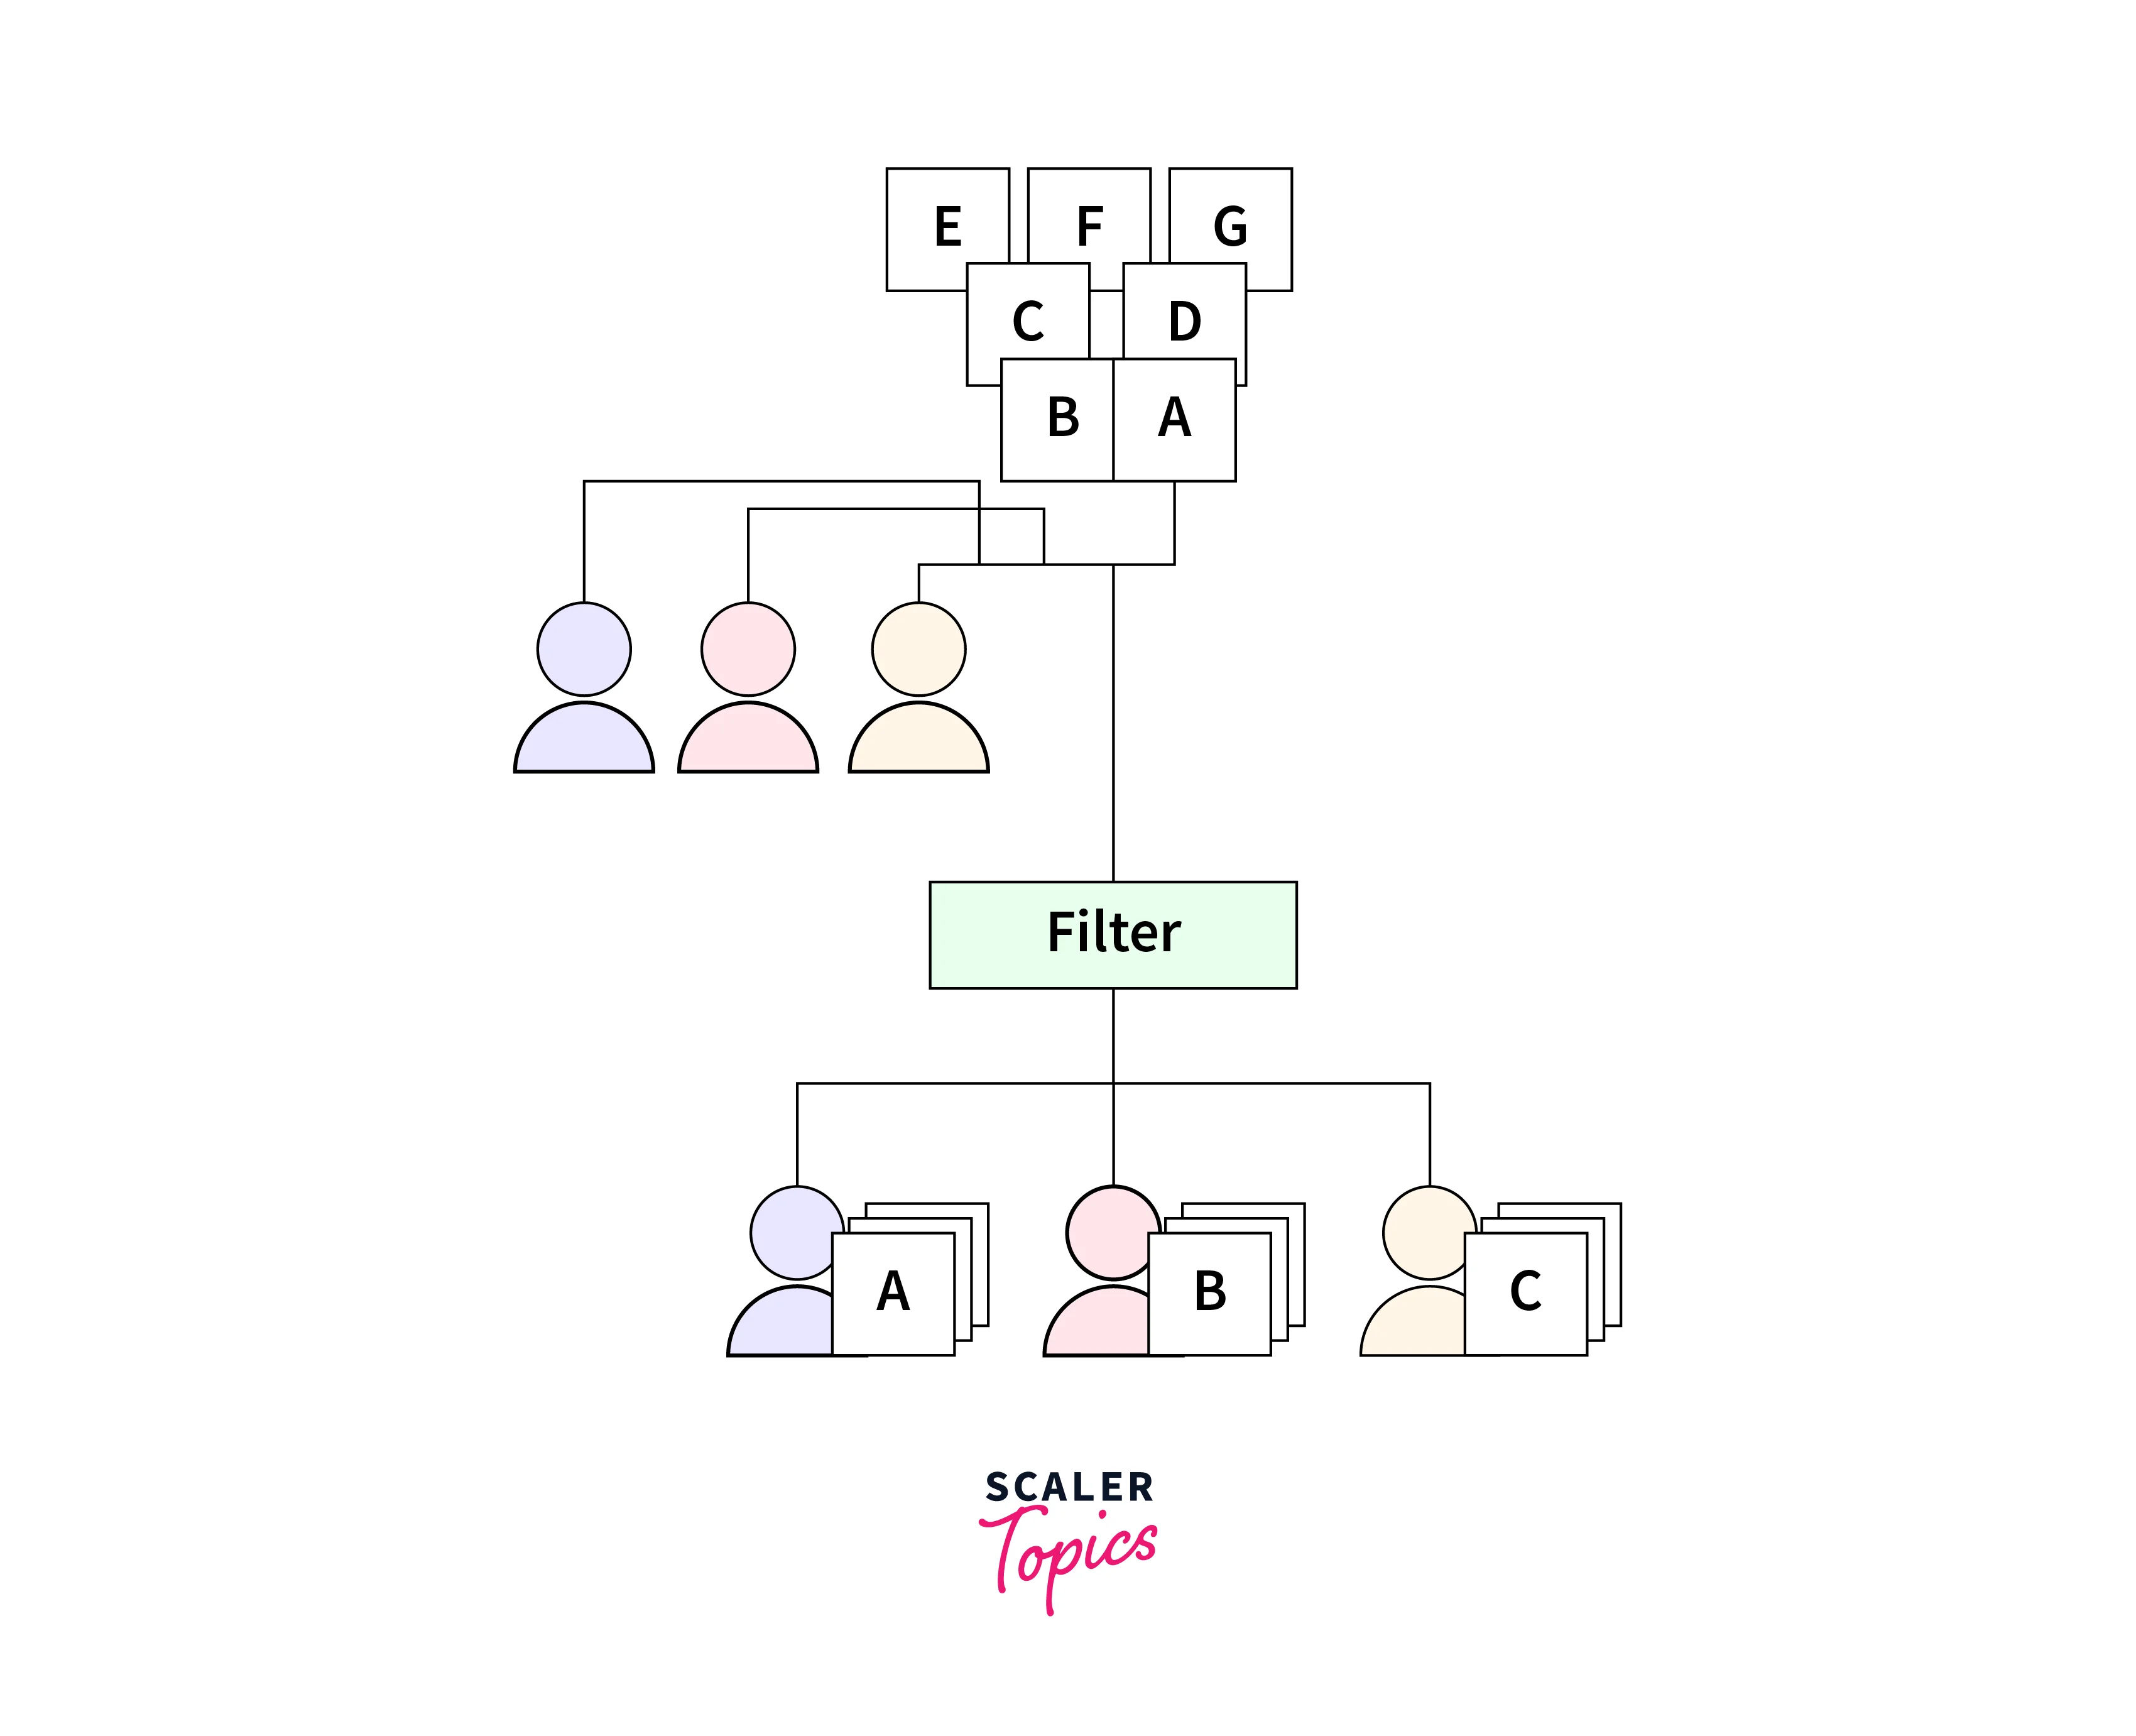 tensorflow recommendation system architecture